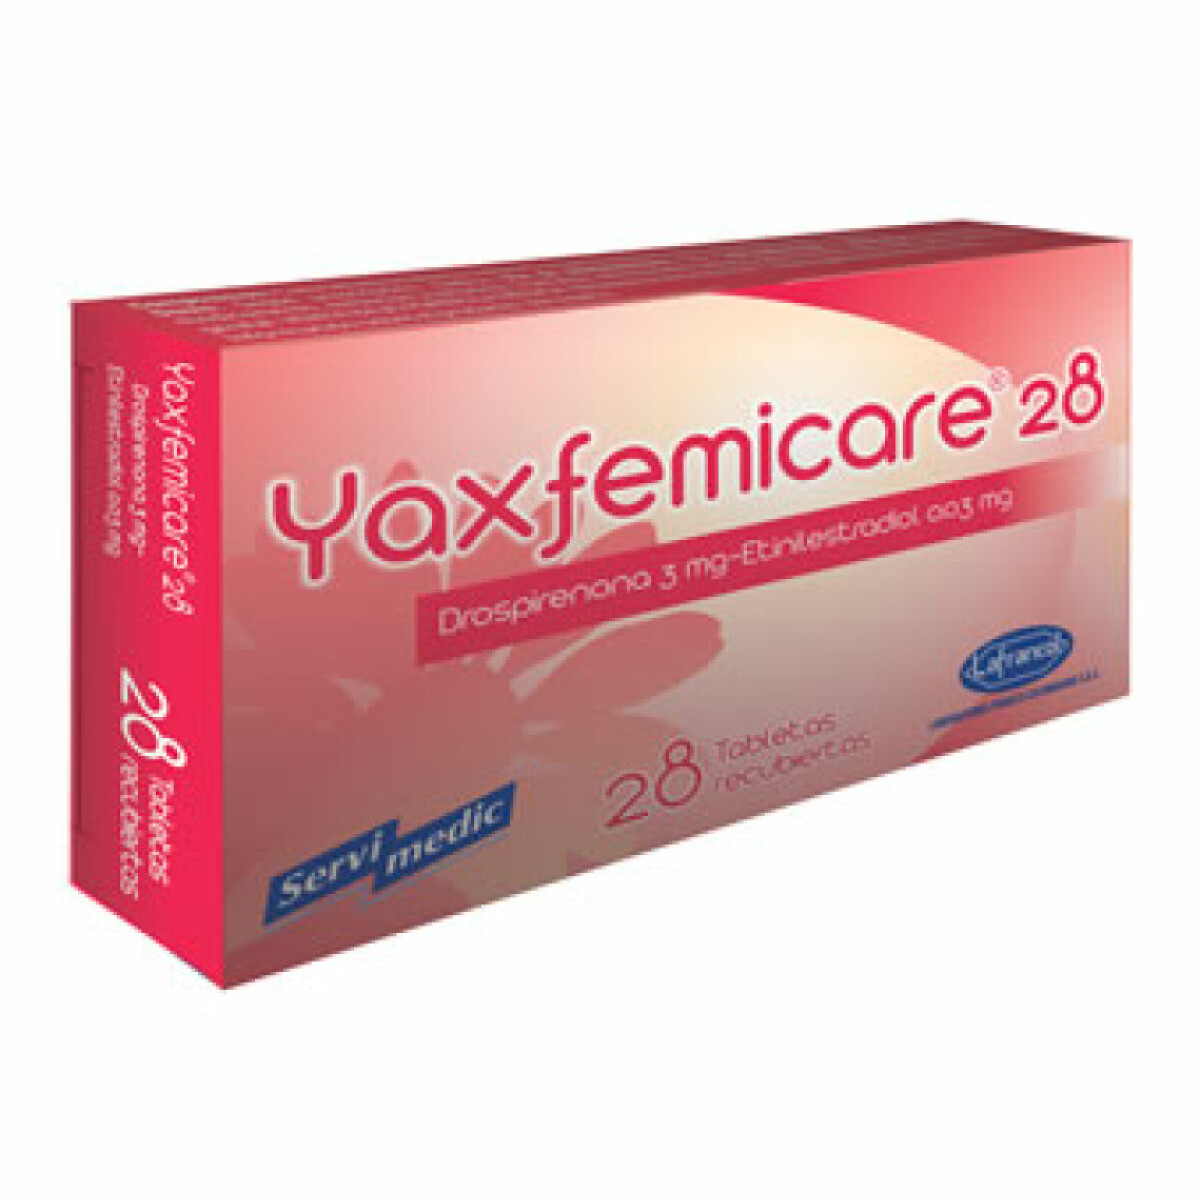 Yaxfemicare 28 comprimidos 